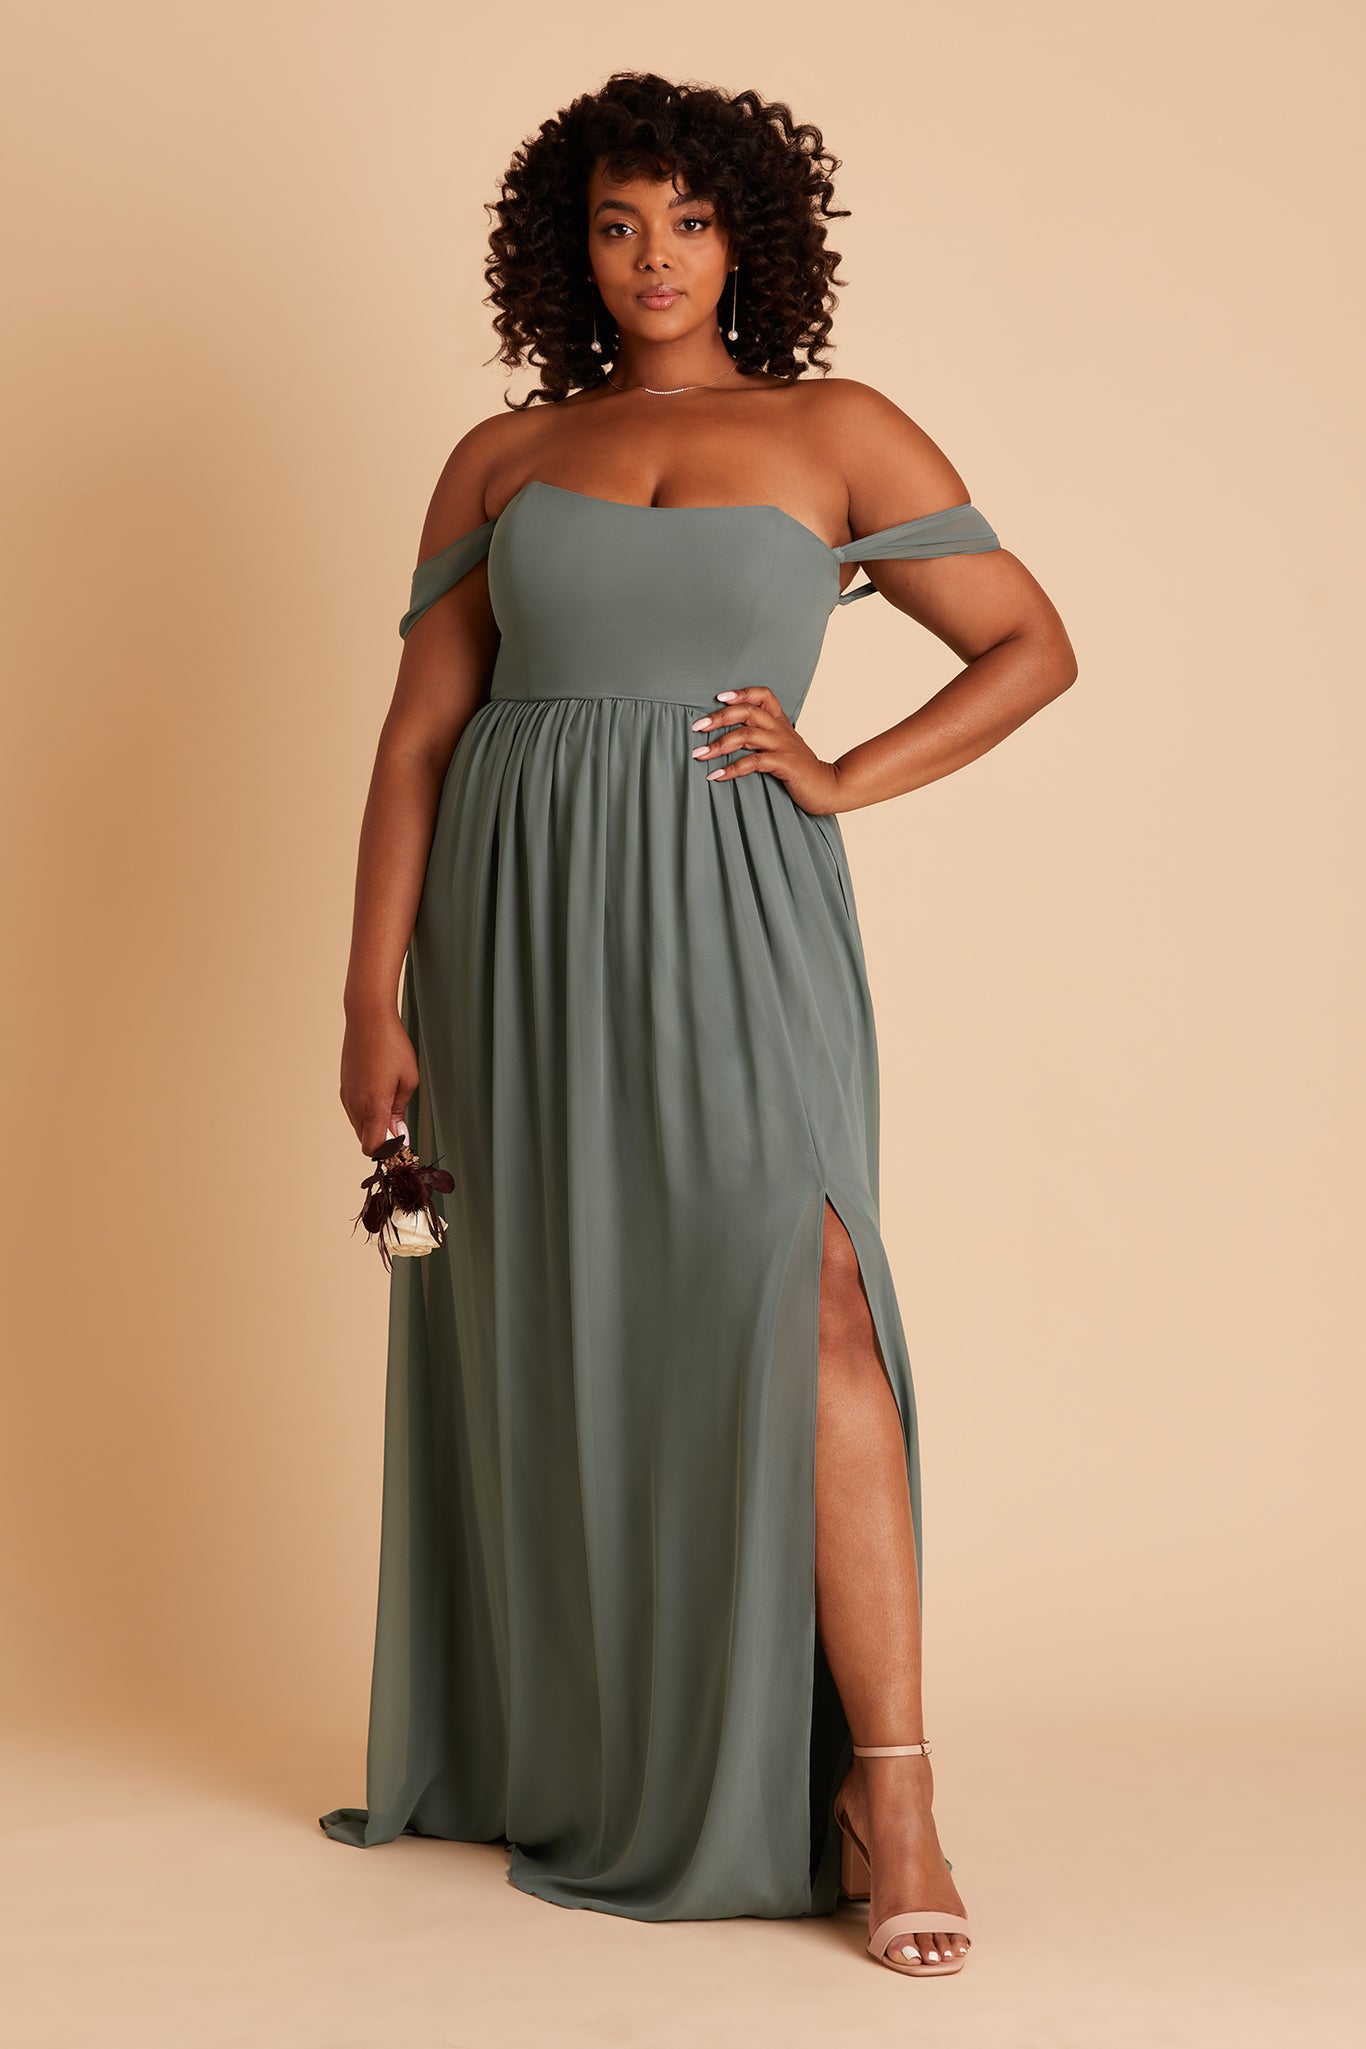 August plus size bridesmaid dress with slit in sea glass chiffon by Birdy Grey, front view